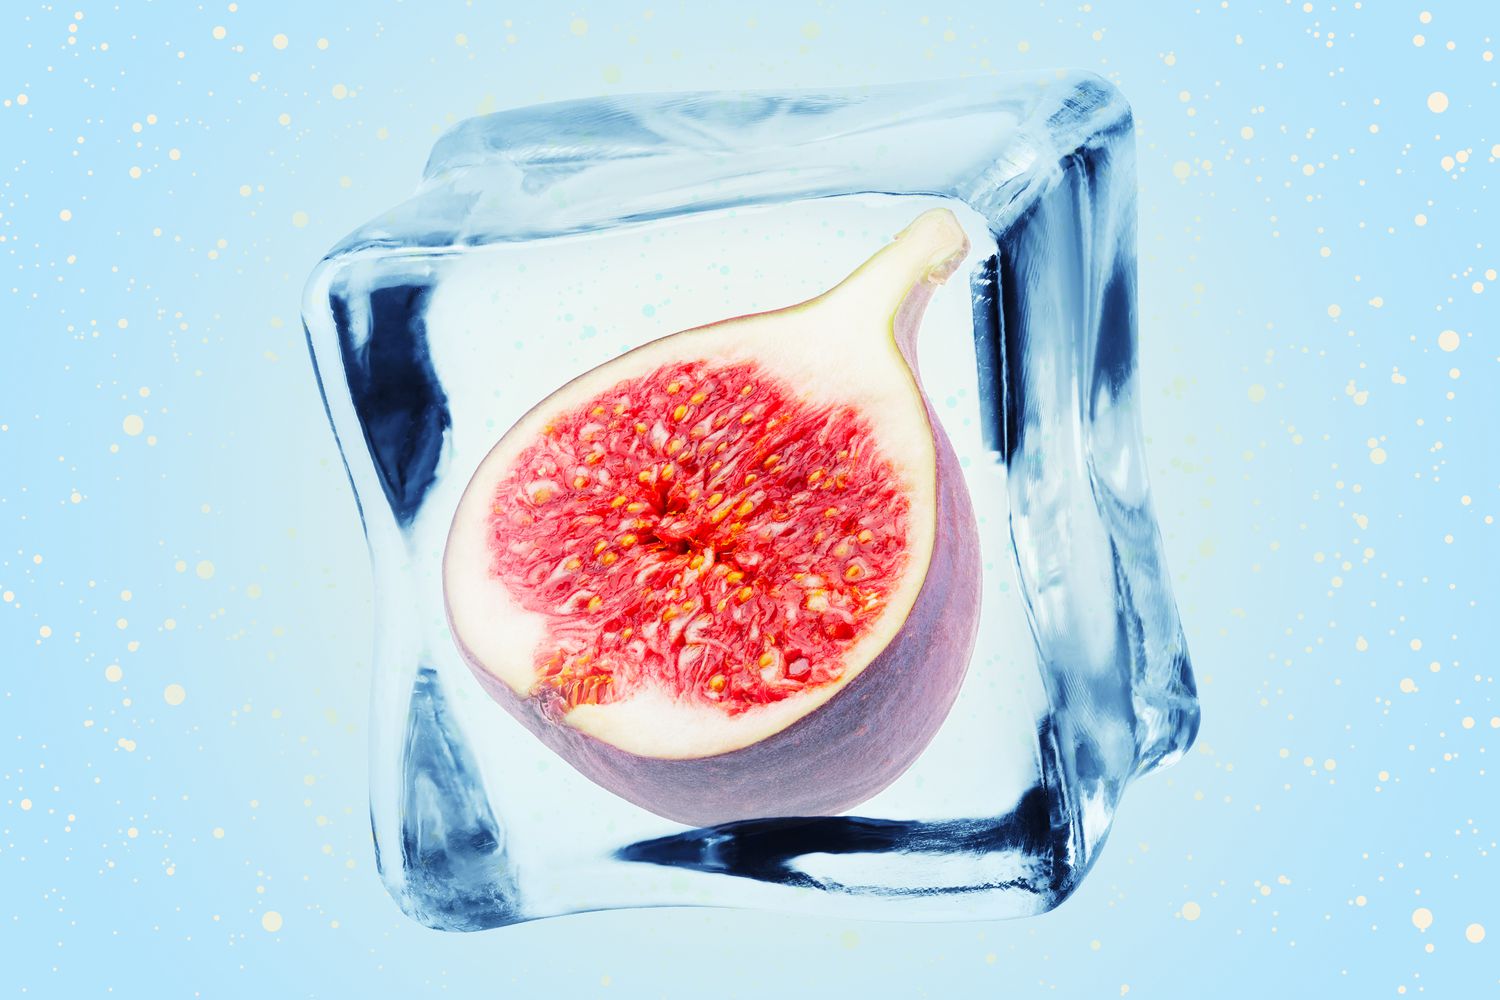 An icecube with a fig inside on a designed background